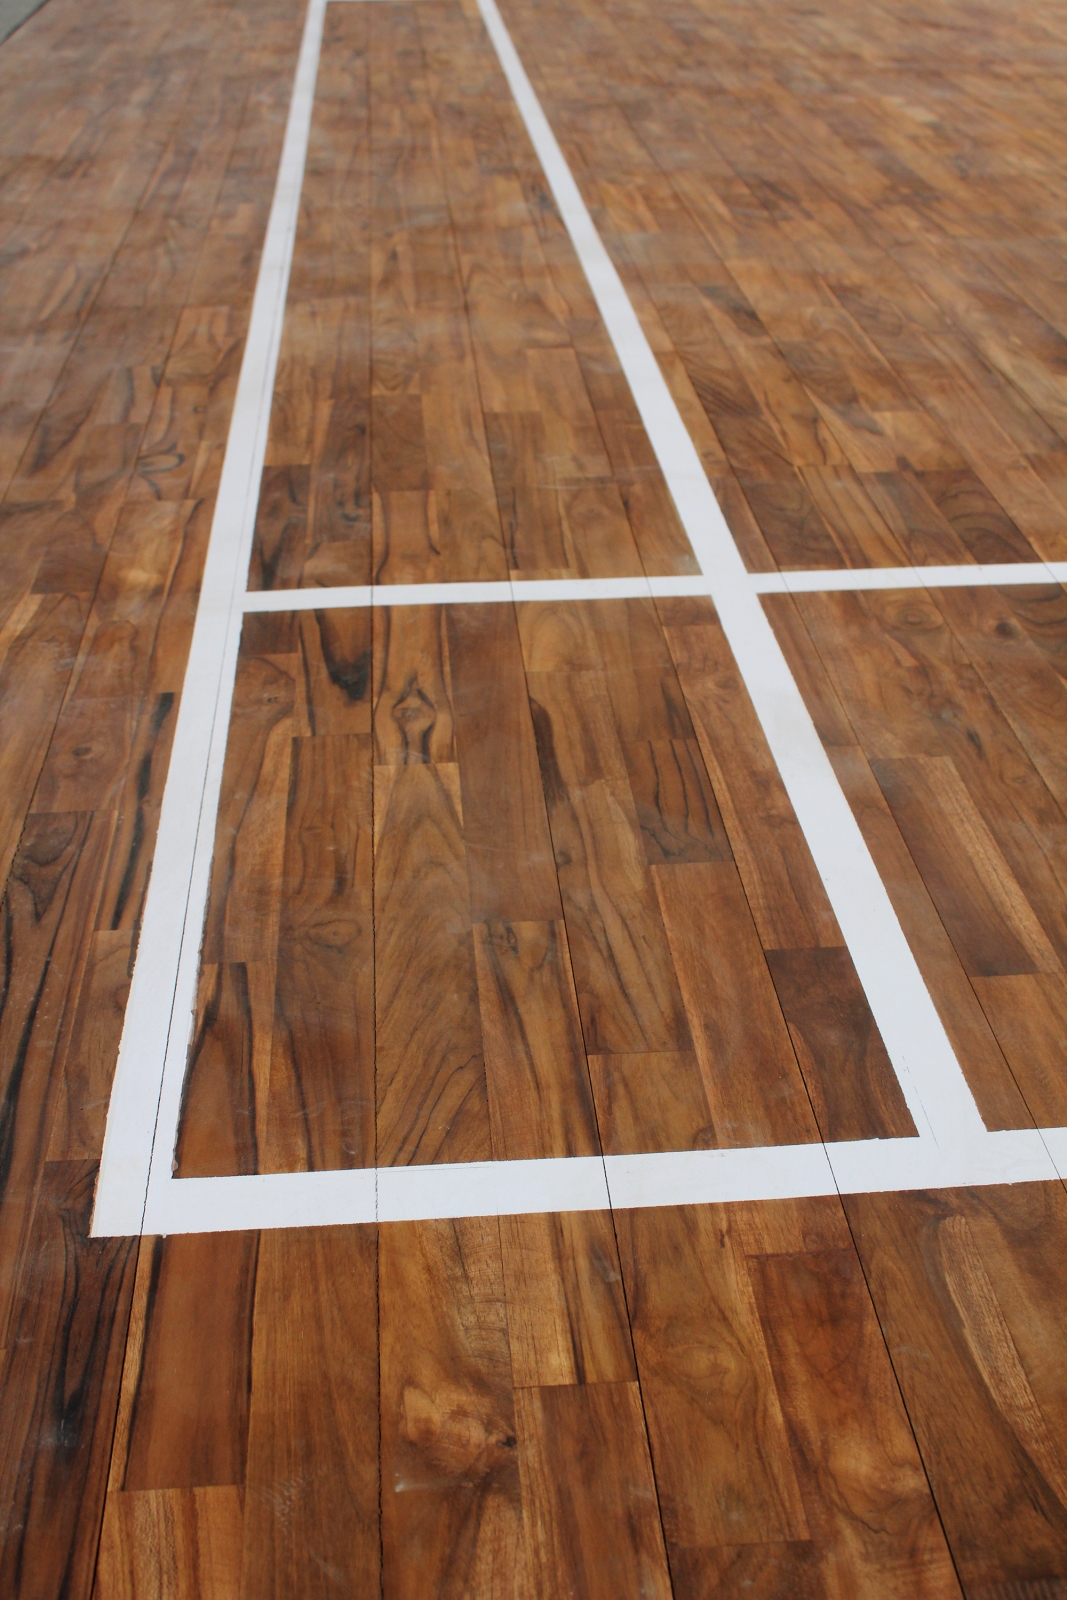 Wooden Badminton Court Surface With White Lines Links